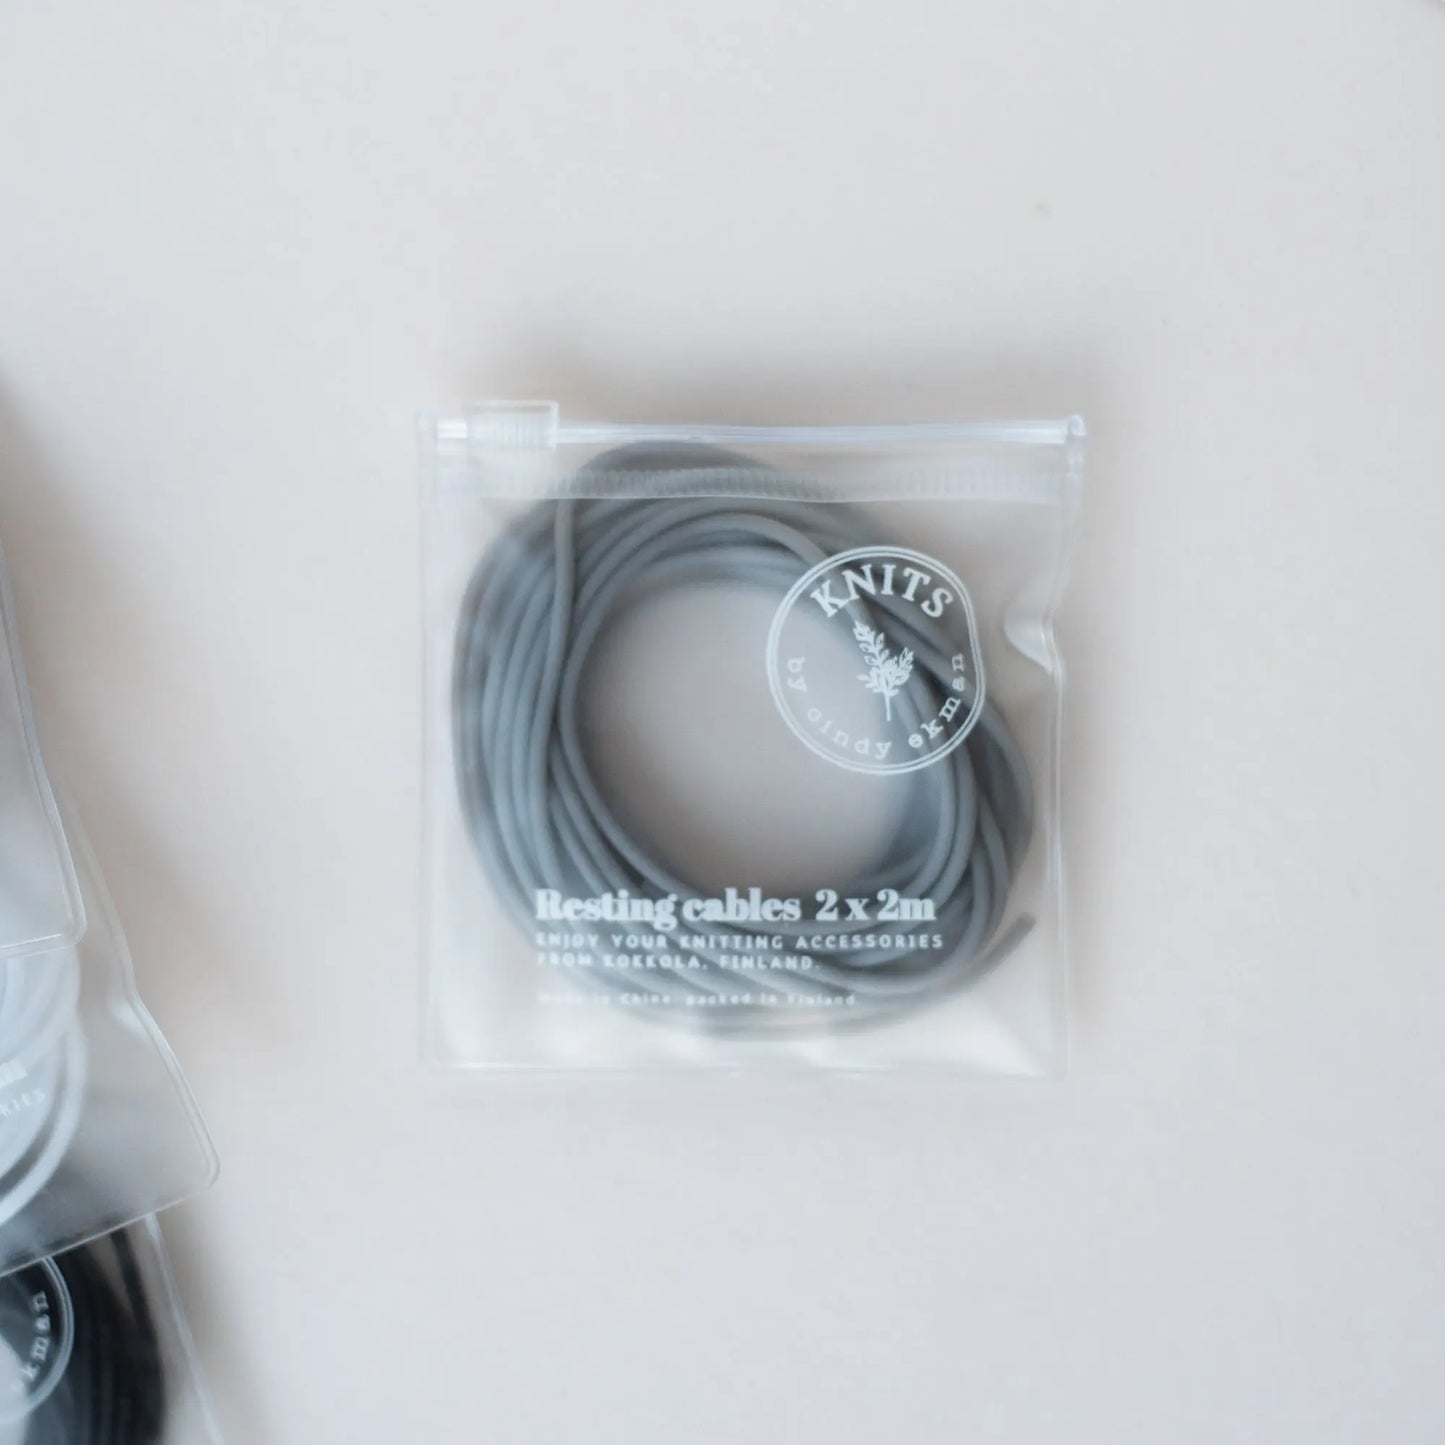 Resting cables in ziplock bags